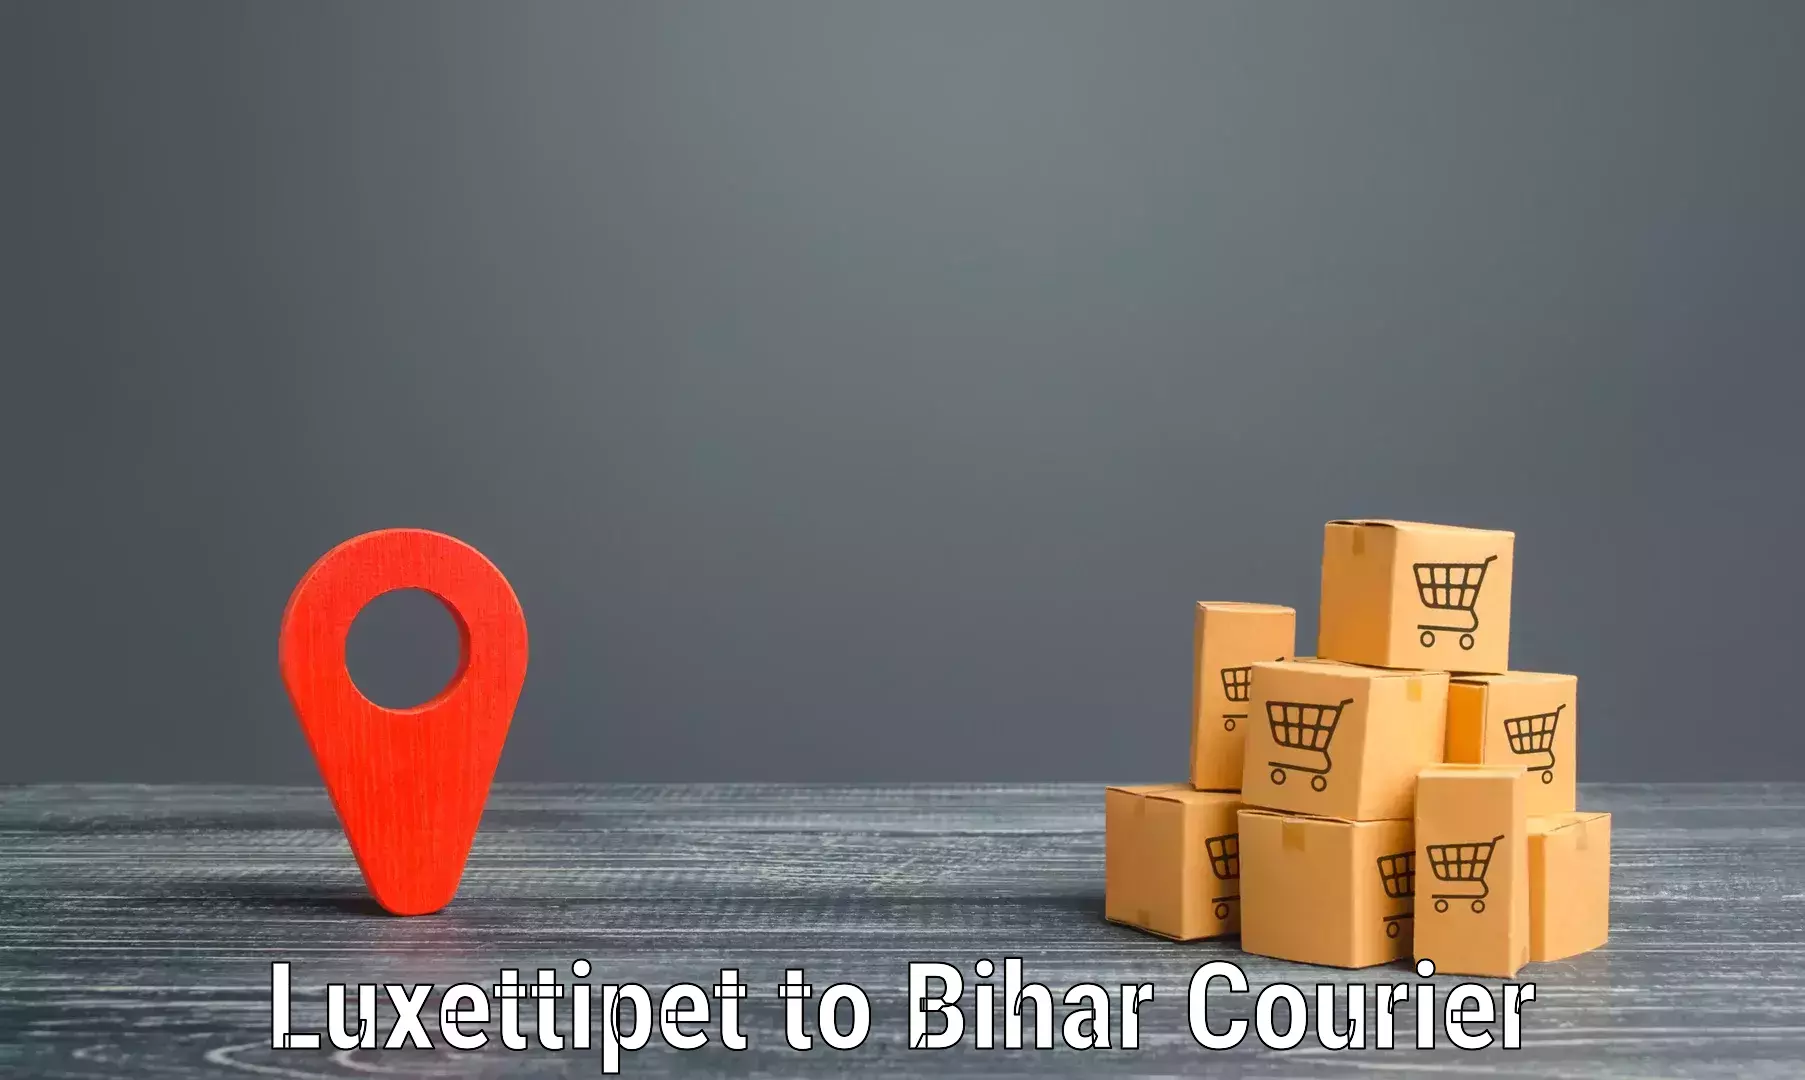 Business shipping needs Luxettipet to Dhaka